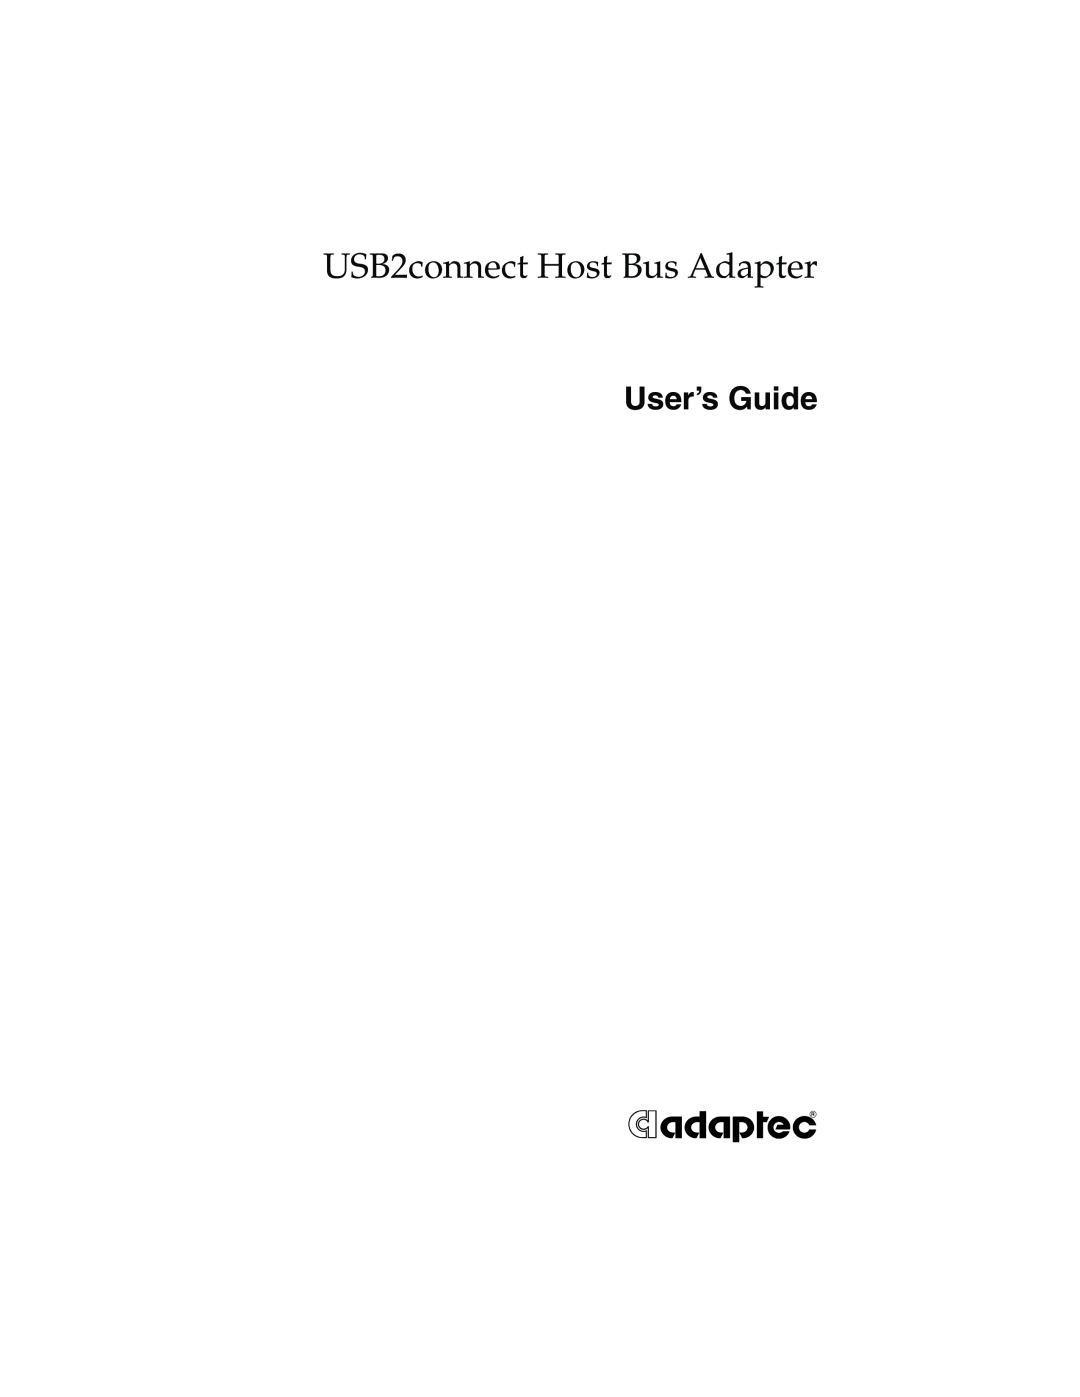 Adaptec USB2connect Host Bus Adapter manual User’s Guide 